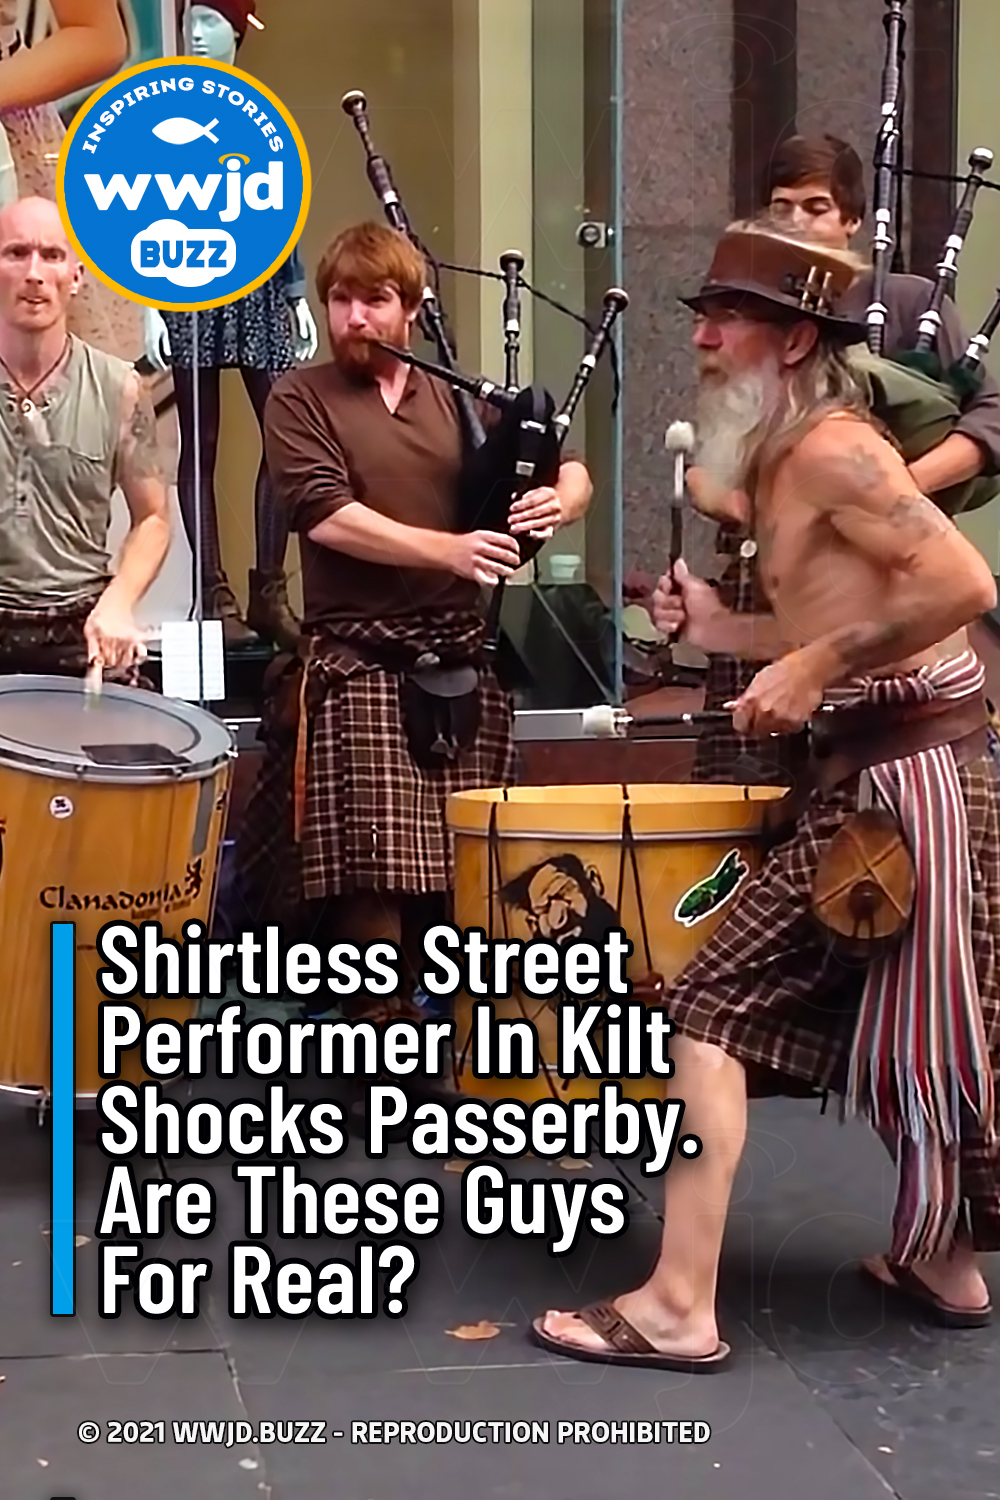 Shirtless Street Performer In Kilt Shocks Passerby. Are These Guys For Real?